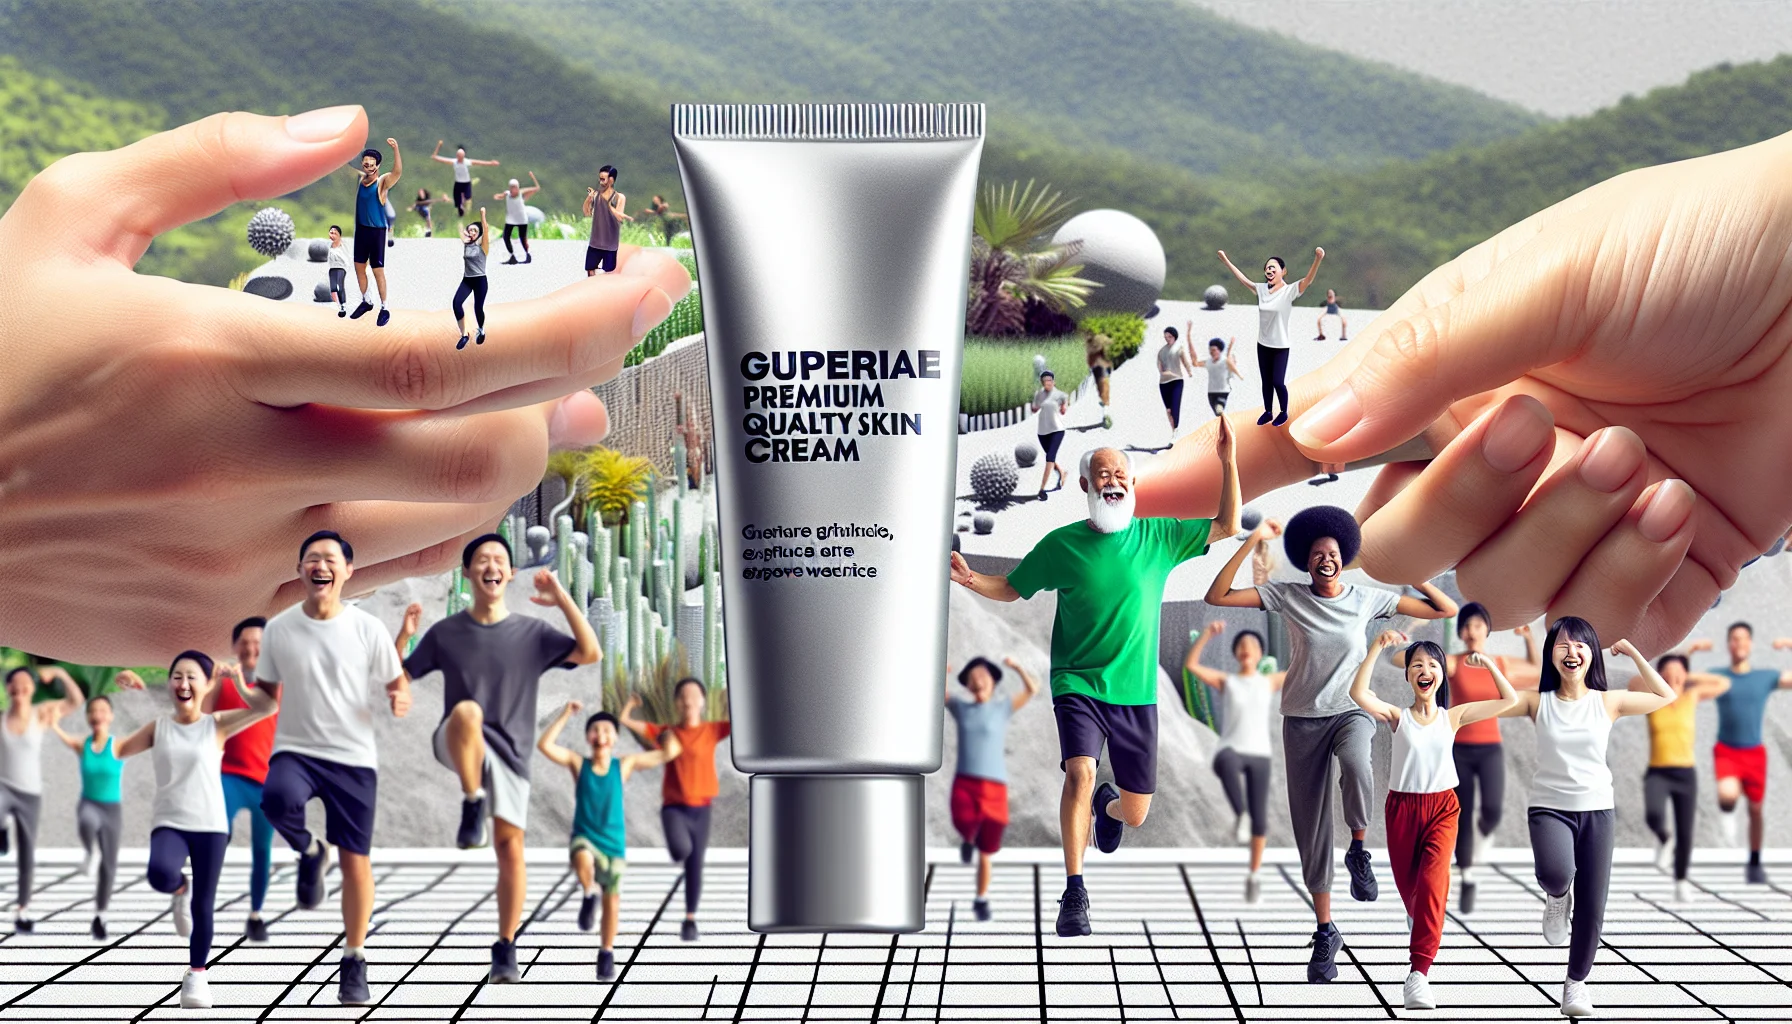 Generate an image that captures a humorous scenario that encourages people to engage in physical exercise. The setting is a gym or an outdoor fitness area. There's a tube of a generic premium-quality skin cream, representing the idea of skincare and exercise working hand-in-hand to improve wellbeing. This cream has a label indicating that it's superior in enhancing skin health. There are people of different descents and genders, laughing and engaging in different forms of exercise, showcasing their enthusiasm for fitness. Their radiant and healthy-looking skin implies the cream's positive effect.